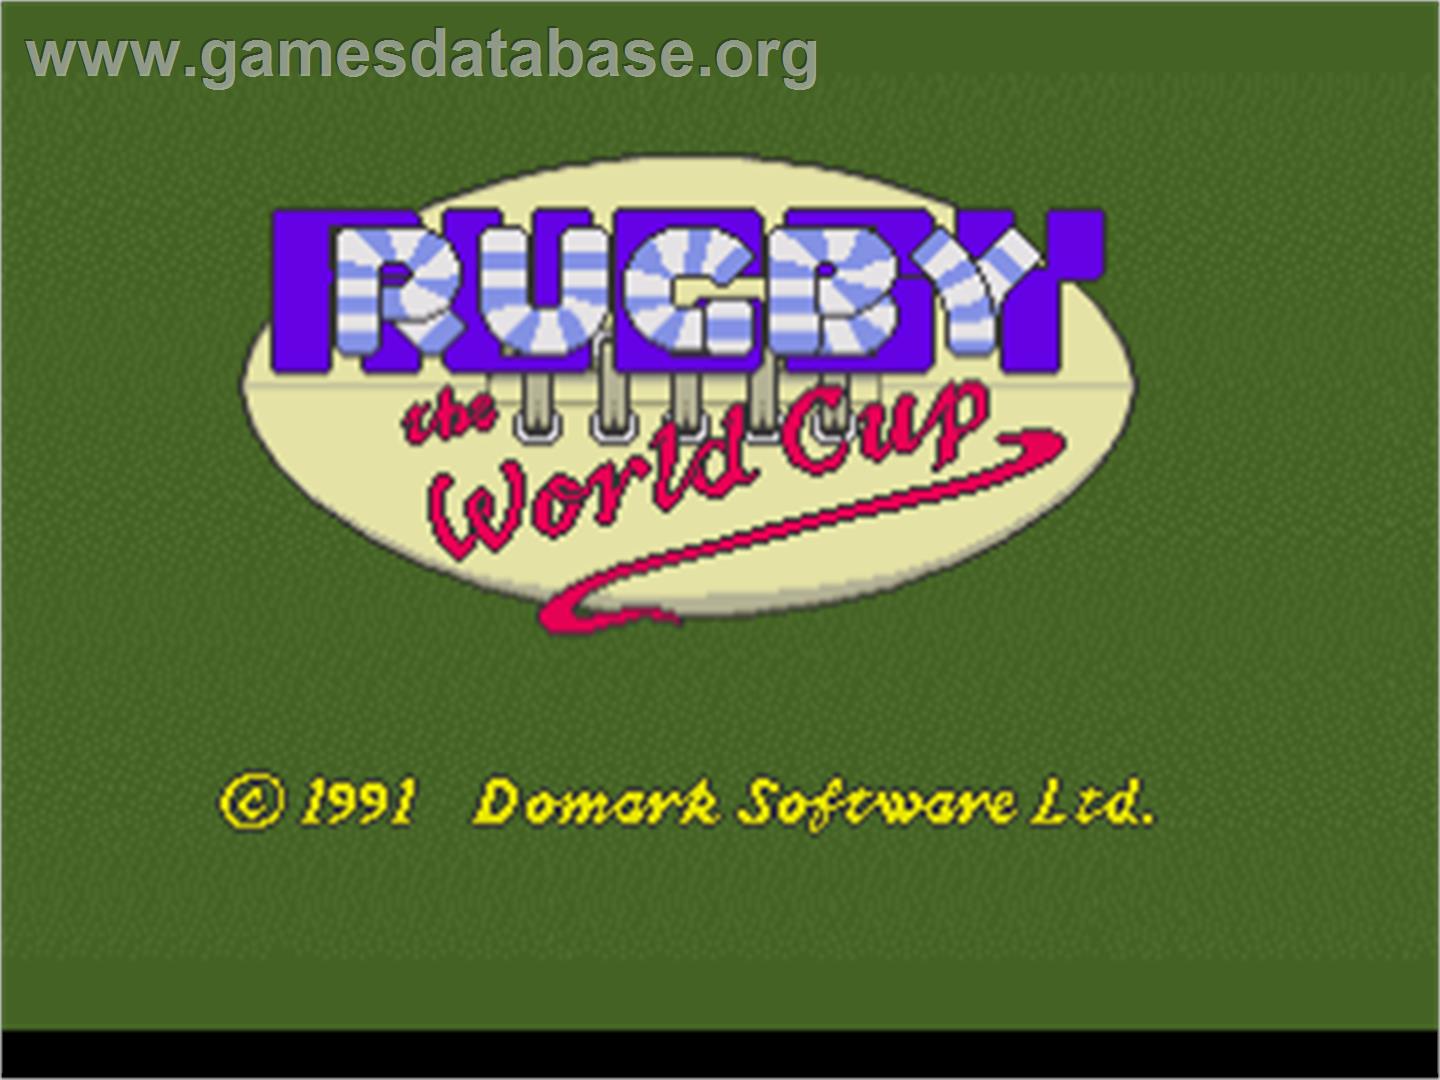 Rugby: The World Cup - Commodore Amiga - Artwork - Title Screen